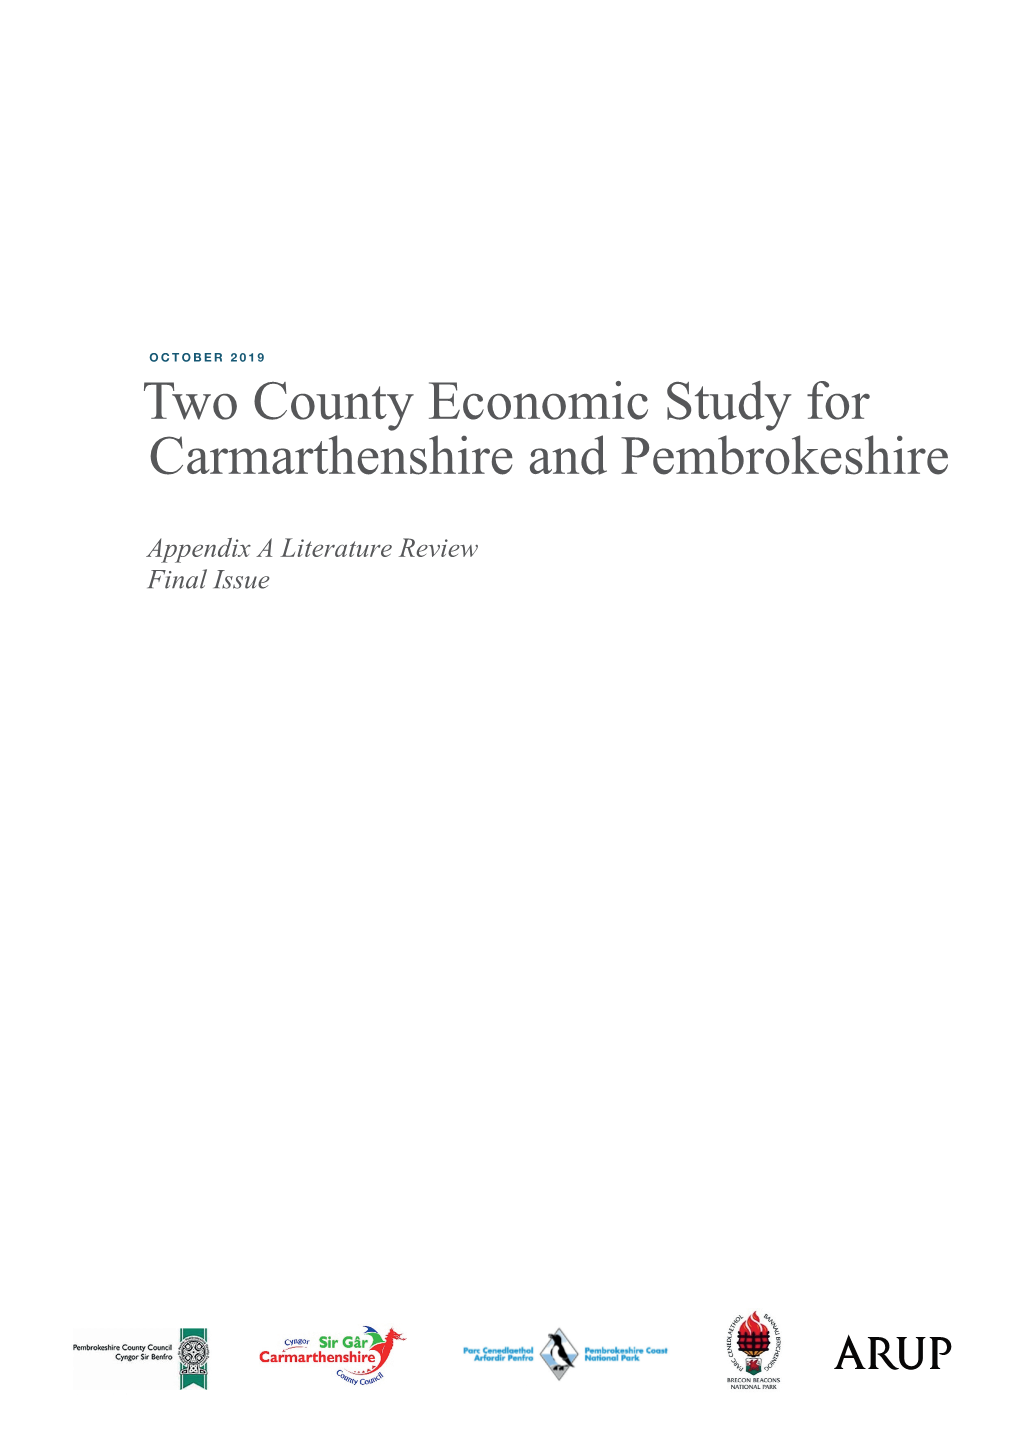 Two County Economic Study for Carmarthenshire and Pembrokeshire